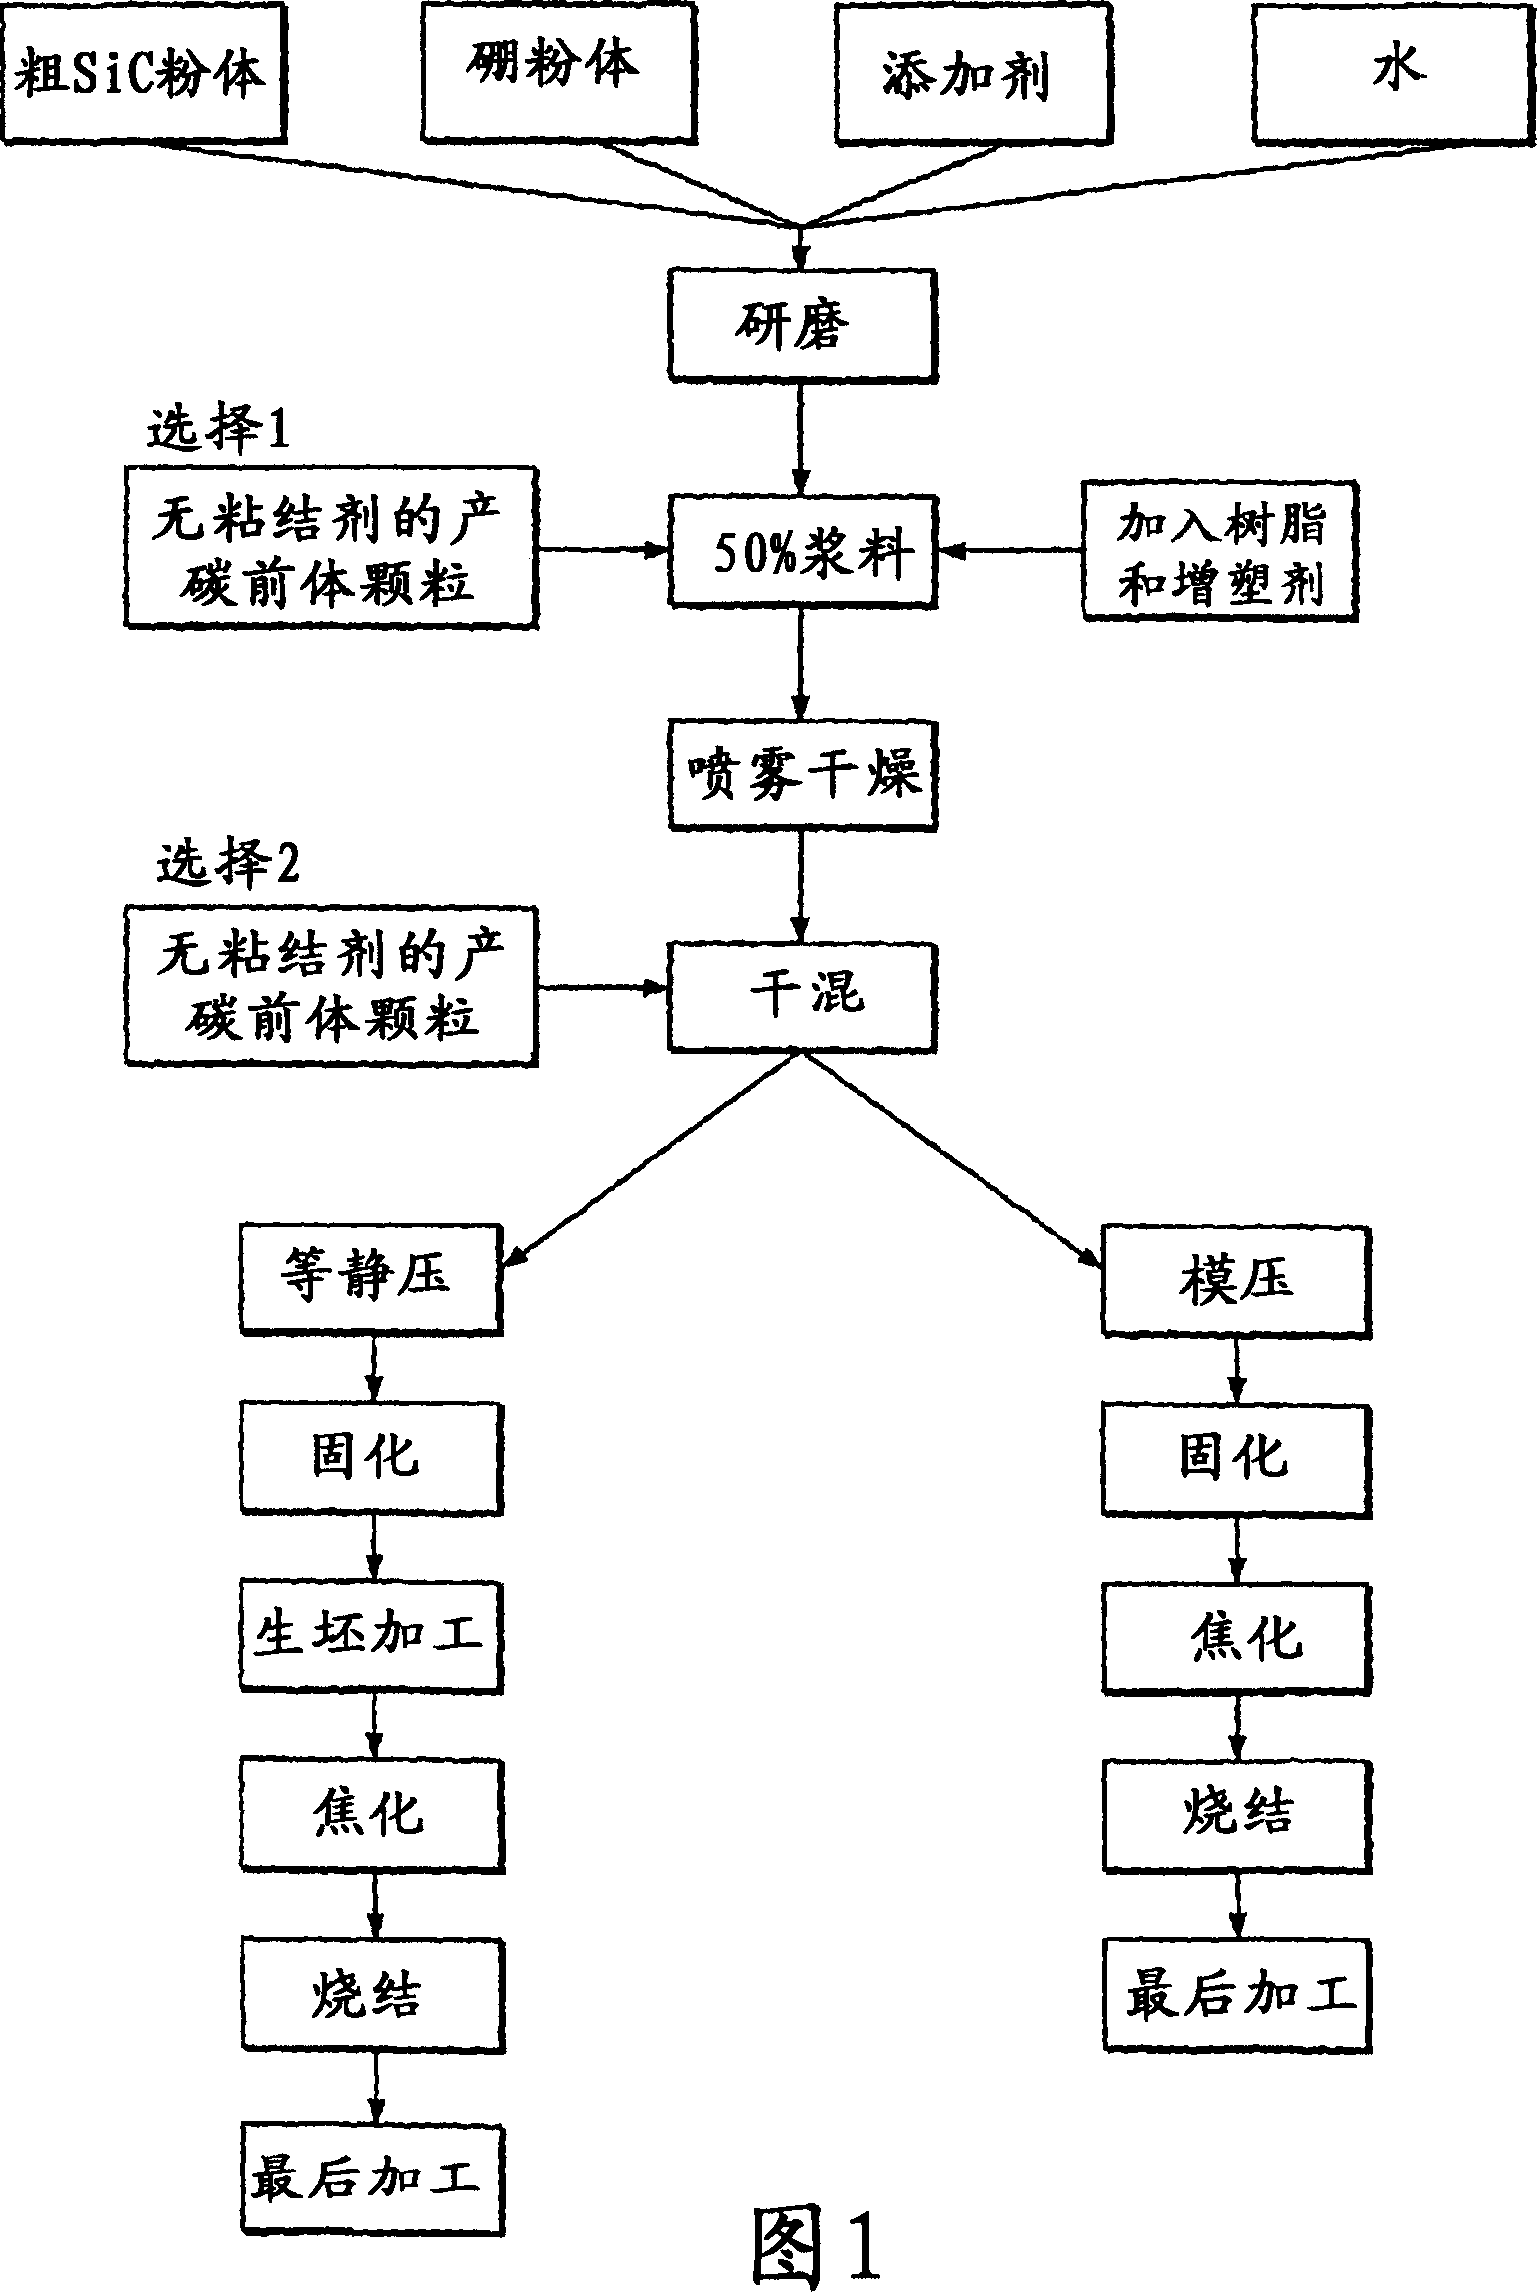 A composite body of silicon carbide and binderless carbon and process for producing